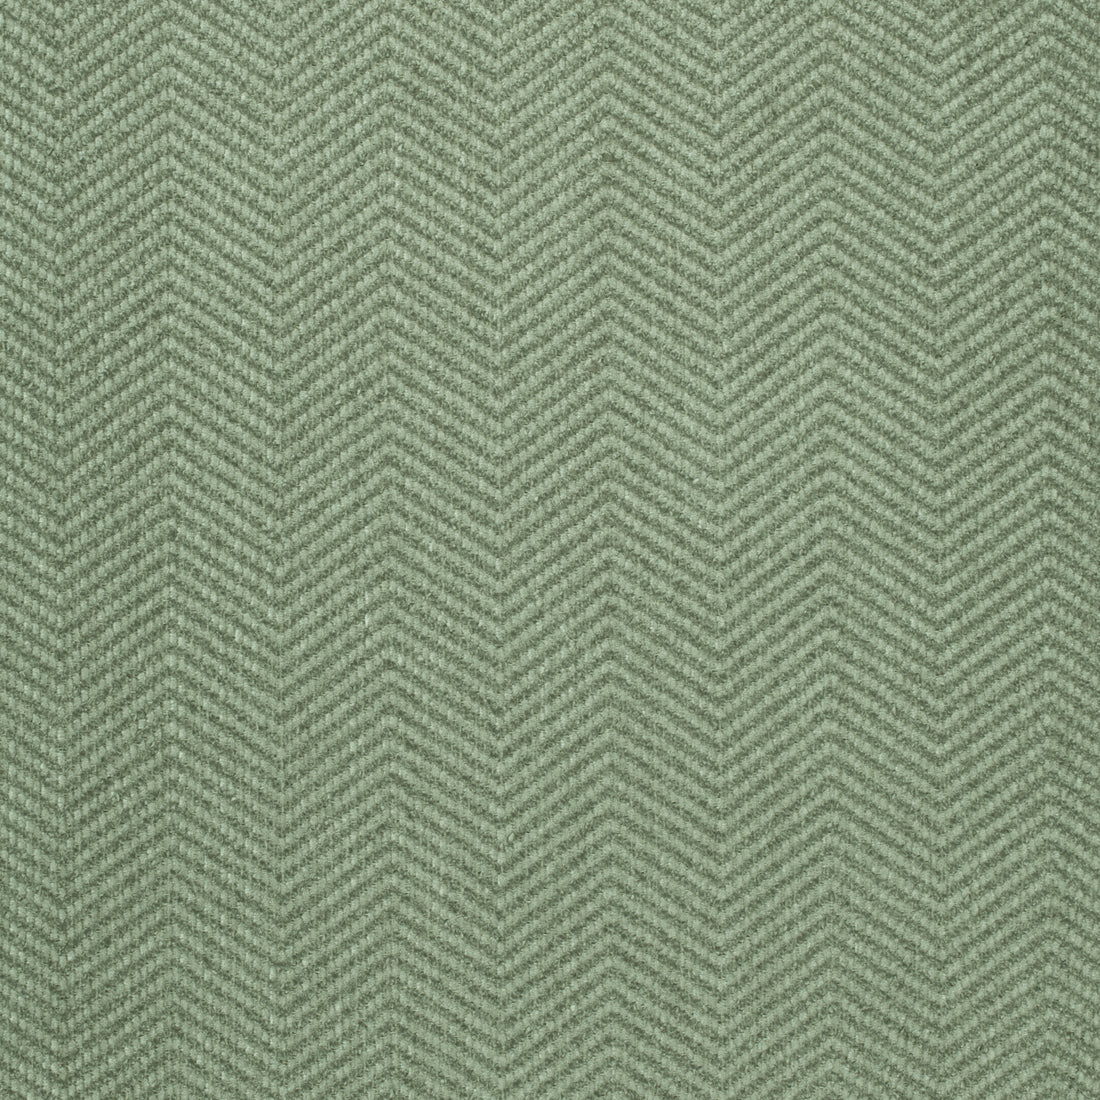 Dalton Herringbone fabric in celadon color - pattern number W80623 - by Thibaut in the Pinnacle collection